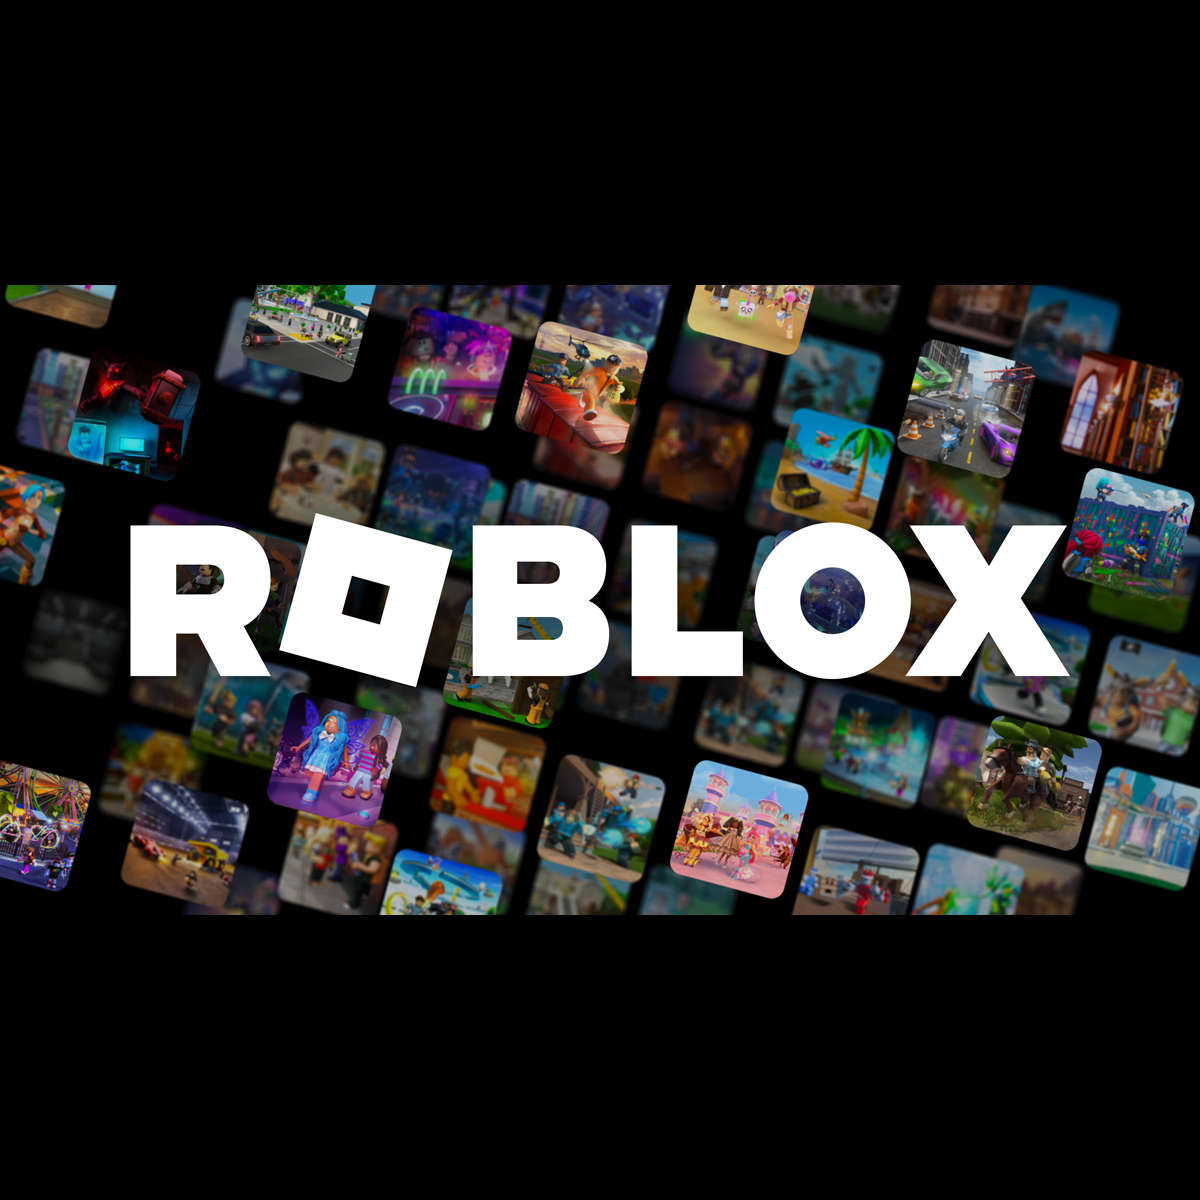 Roblox to Officially Allow 17+ Restricted Content